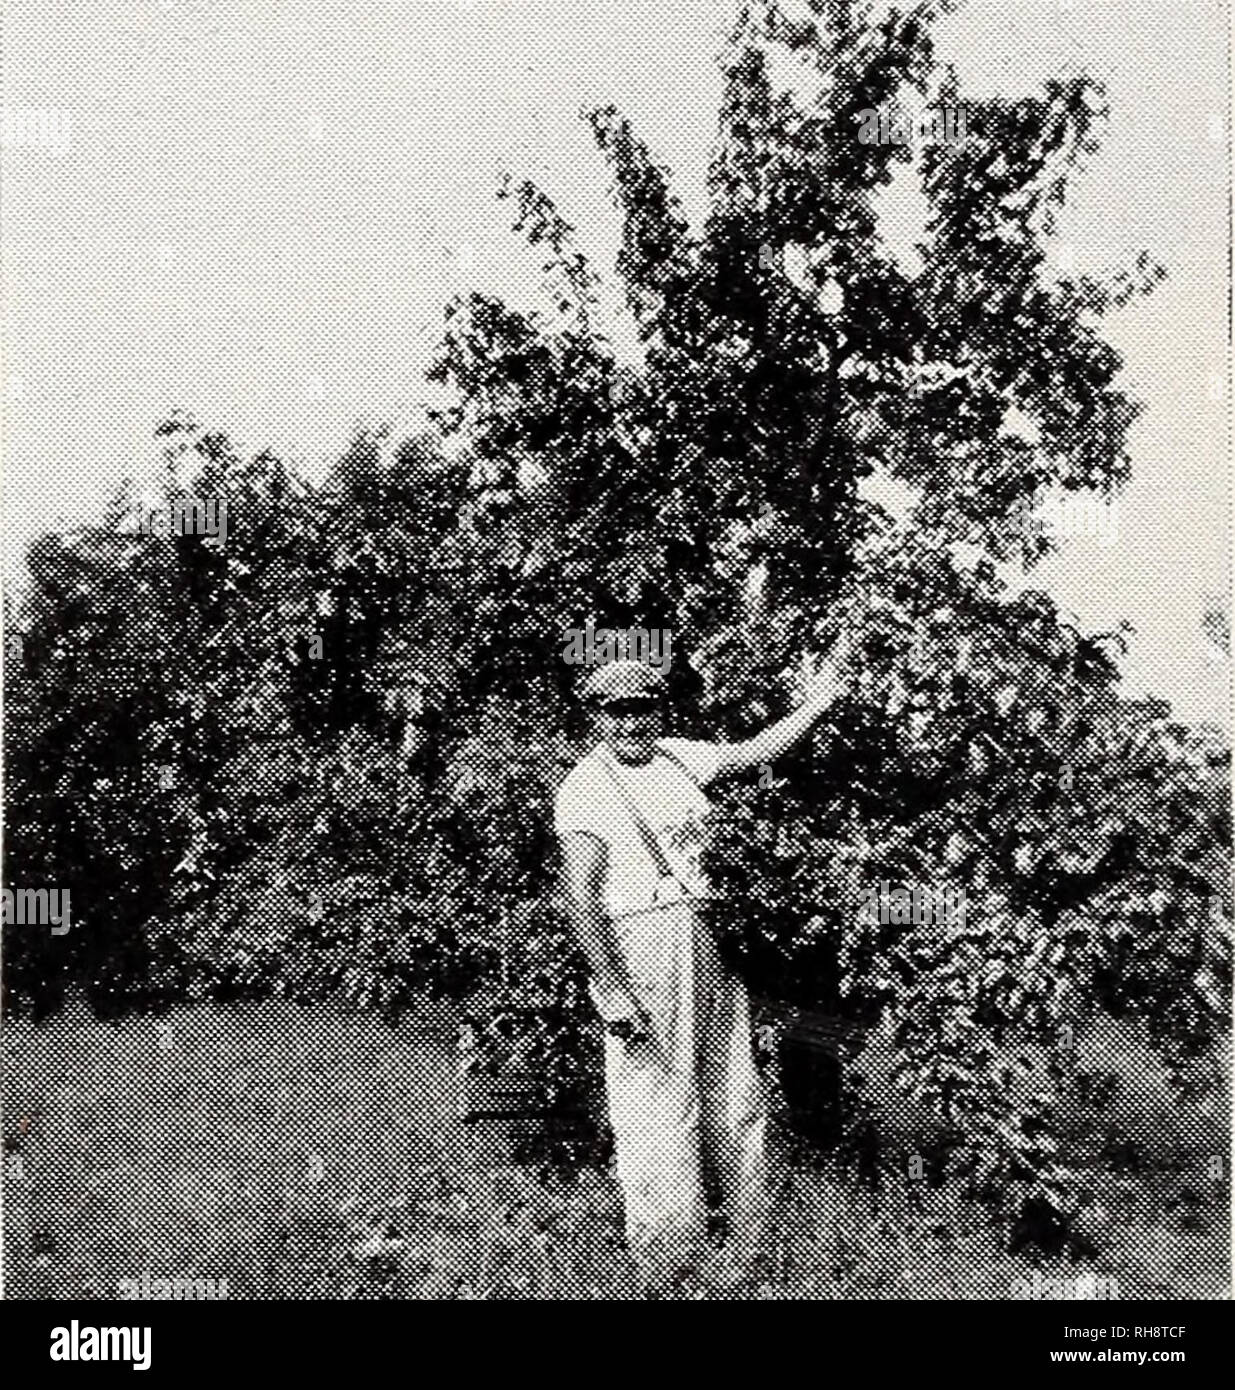 . Bountiful Ridge Nurseries : our complete catalog and planting guide for fall 1948 and spring 1949. Nurseries (Horticulture) Catalogs; Fruit Catalogs; Fruit trees Catalogs; Trees Catalogs; Asparagus Catalogs. The New DEVOE PEAR (Plant rat. 728) A Fine New Pear With Rich Appearance, Large Size, Early Bearing Habits. Long Keeper, Fine Quality, Disease Resistant and Heavy Cropper. It is rare to find a new fruit whicli has created the interest and enthusiam accorded the announcement of the New Devoe Pear. Fruit growers who saw the fruit last fall and winter were loud in praise of its qualities an Stock Photo